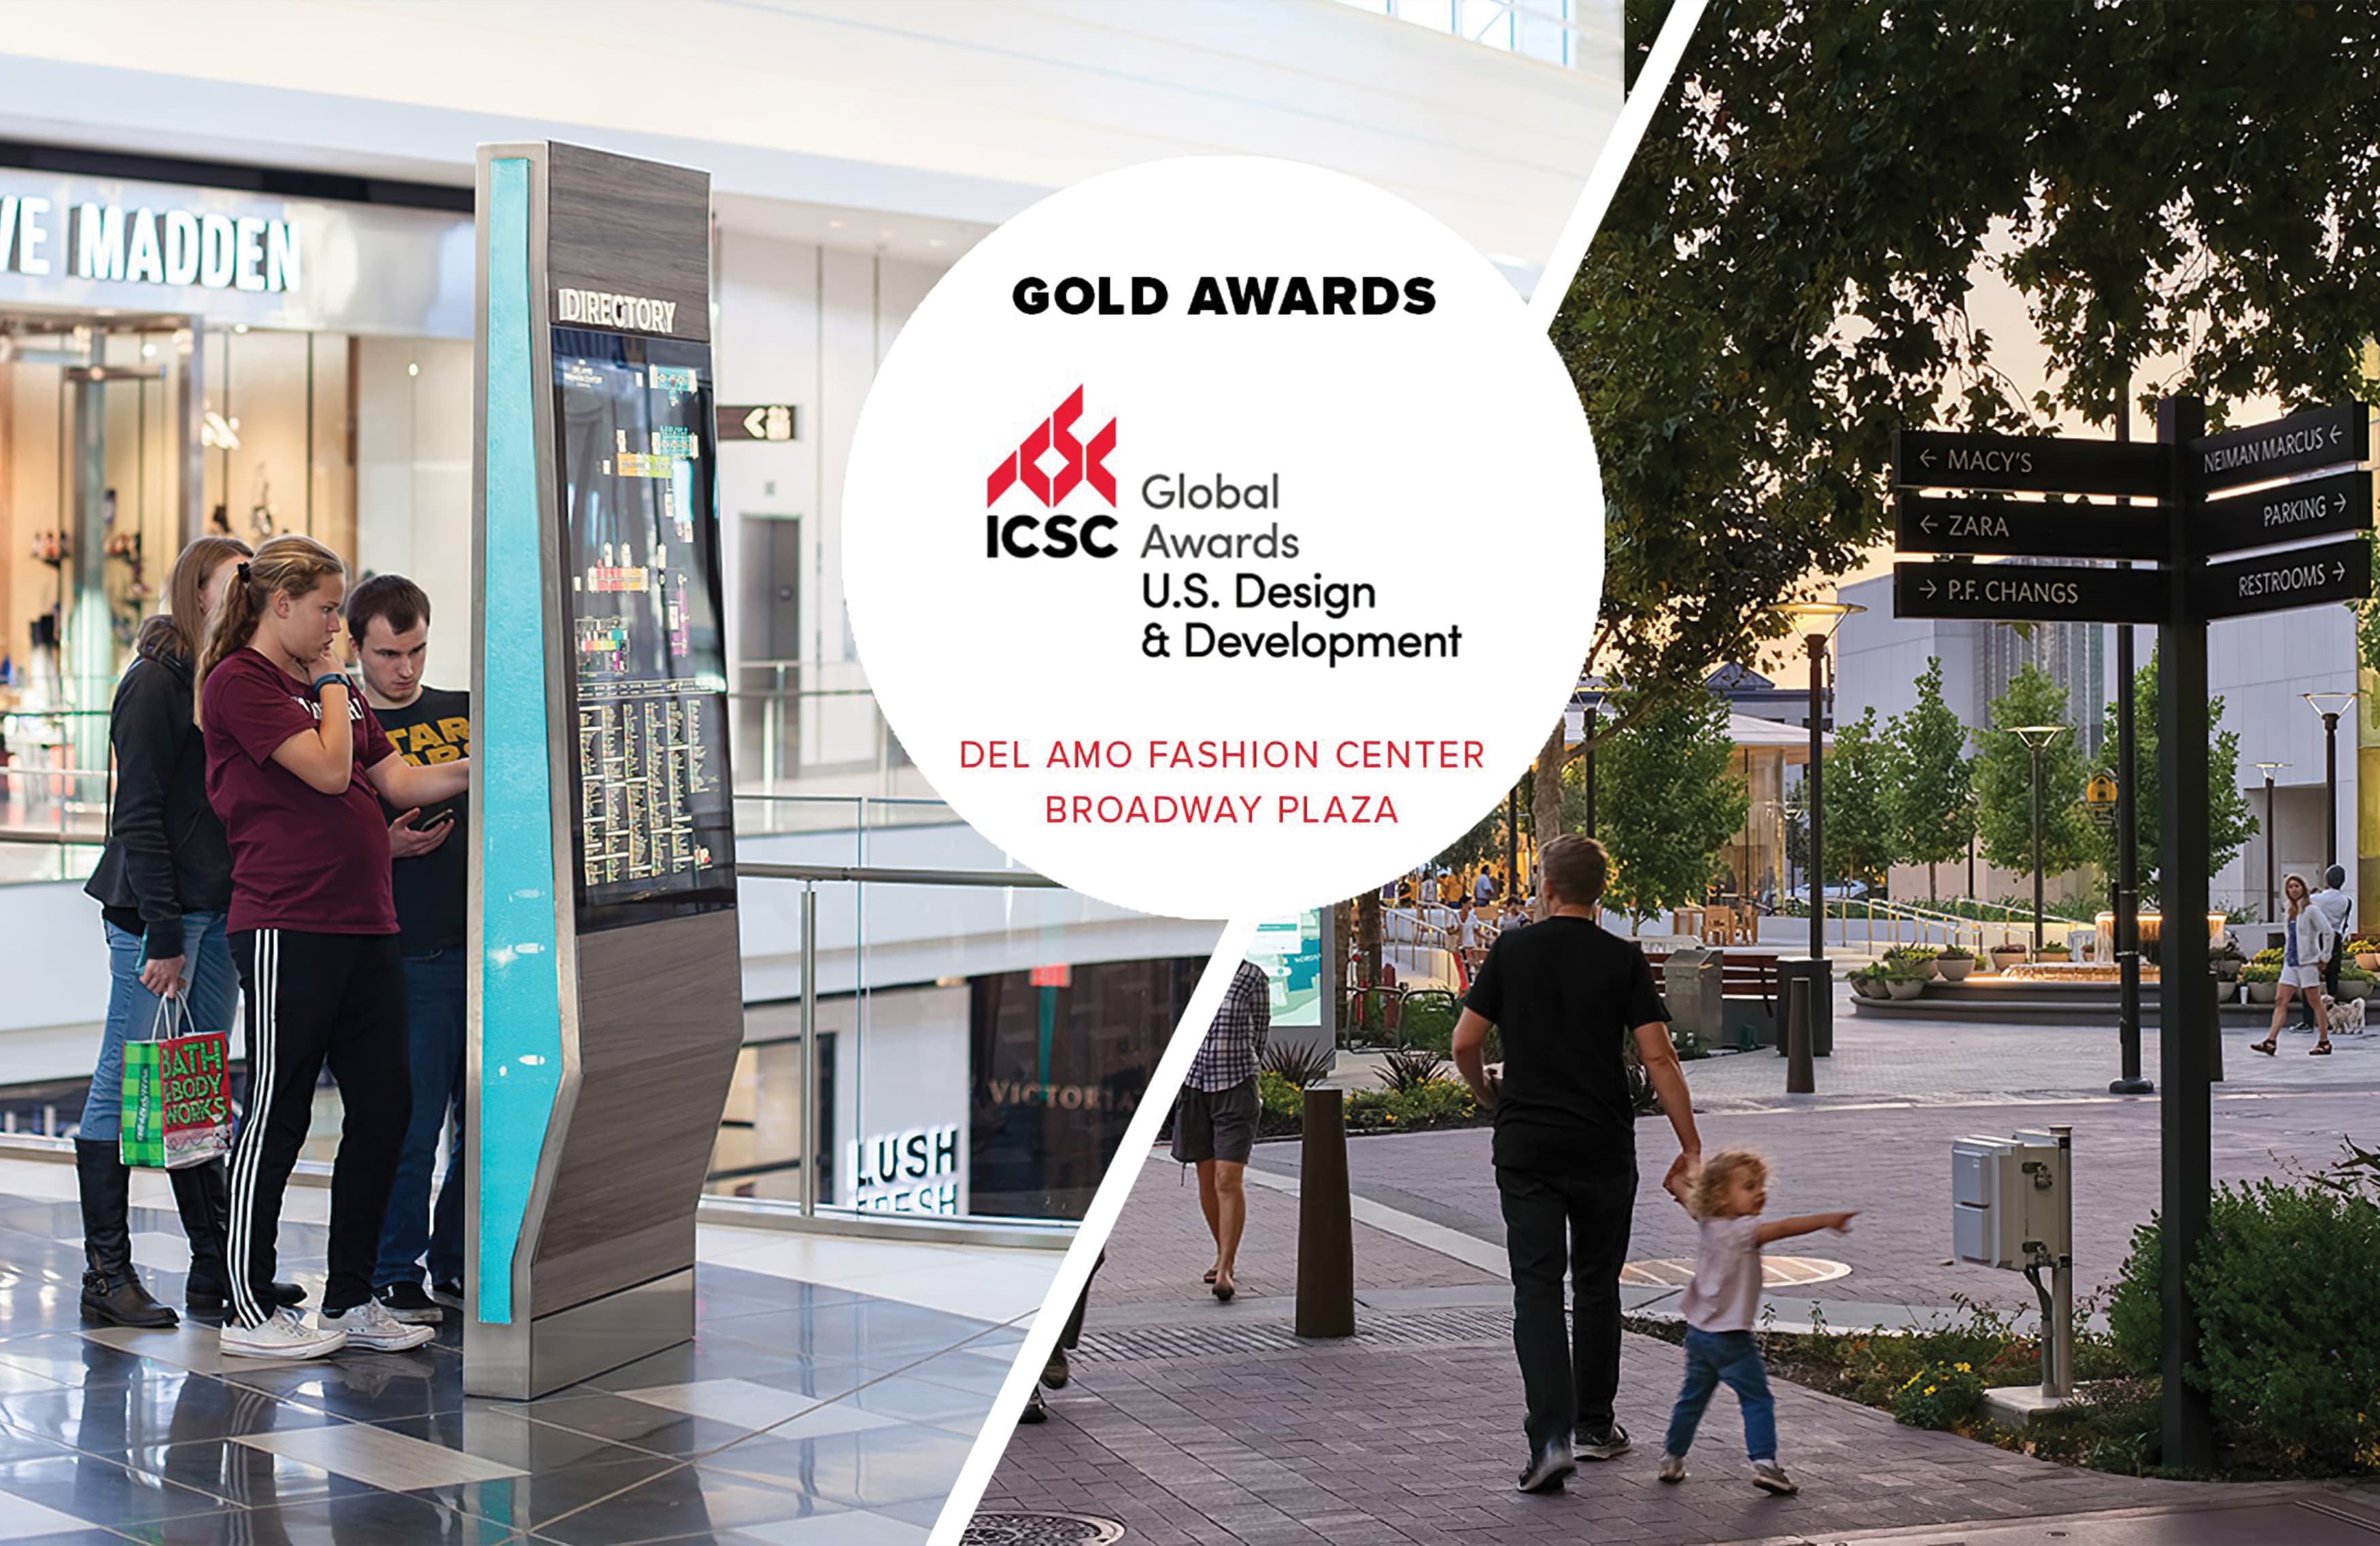 Announcing two ICSC award-winning projects, Del Amo Fashion Center and Broadway Plaza.